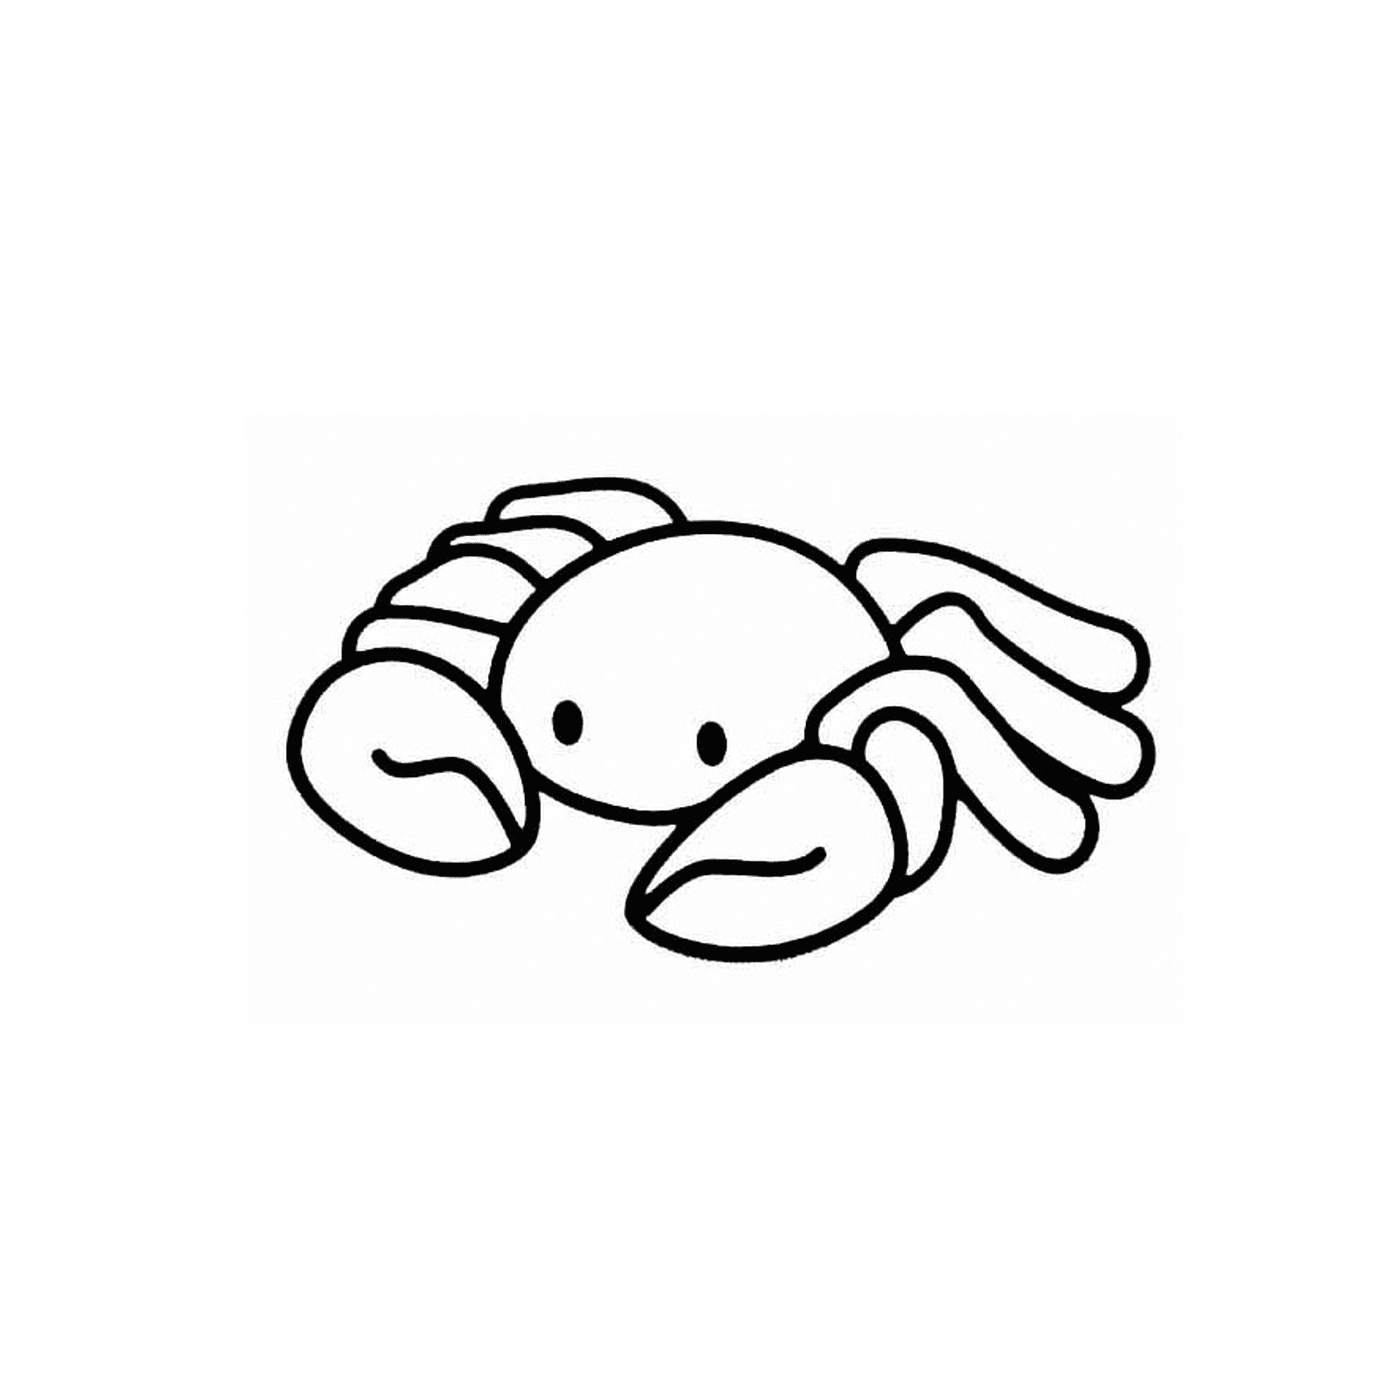  An image of a crab on a white background 